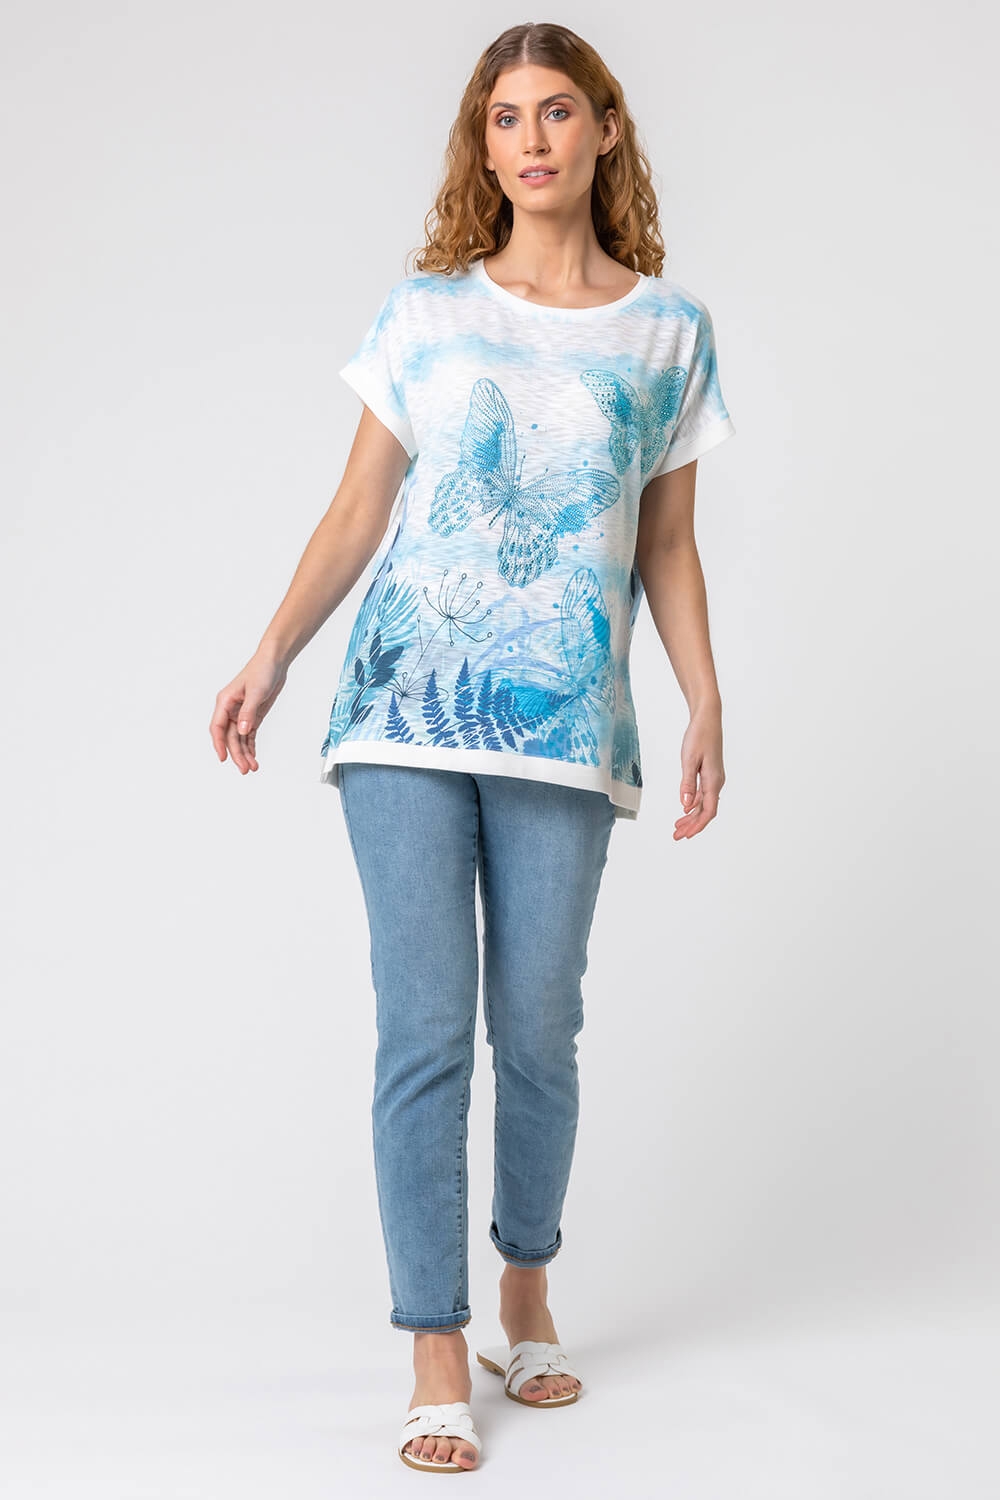 Blue Butterfly Embelished Print T-Shirt, Image 3 of 4